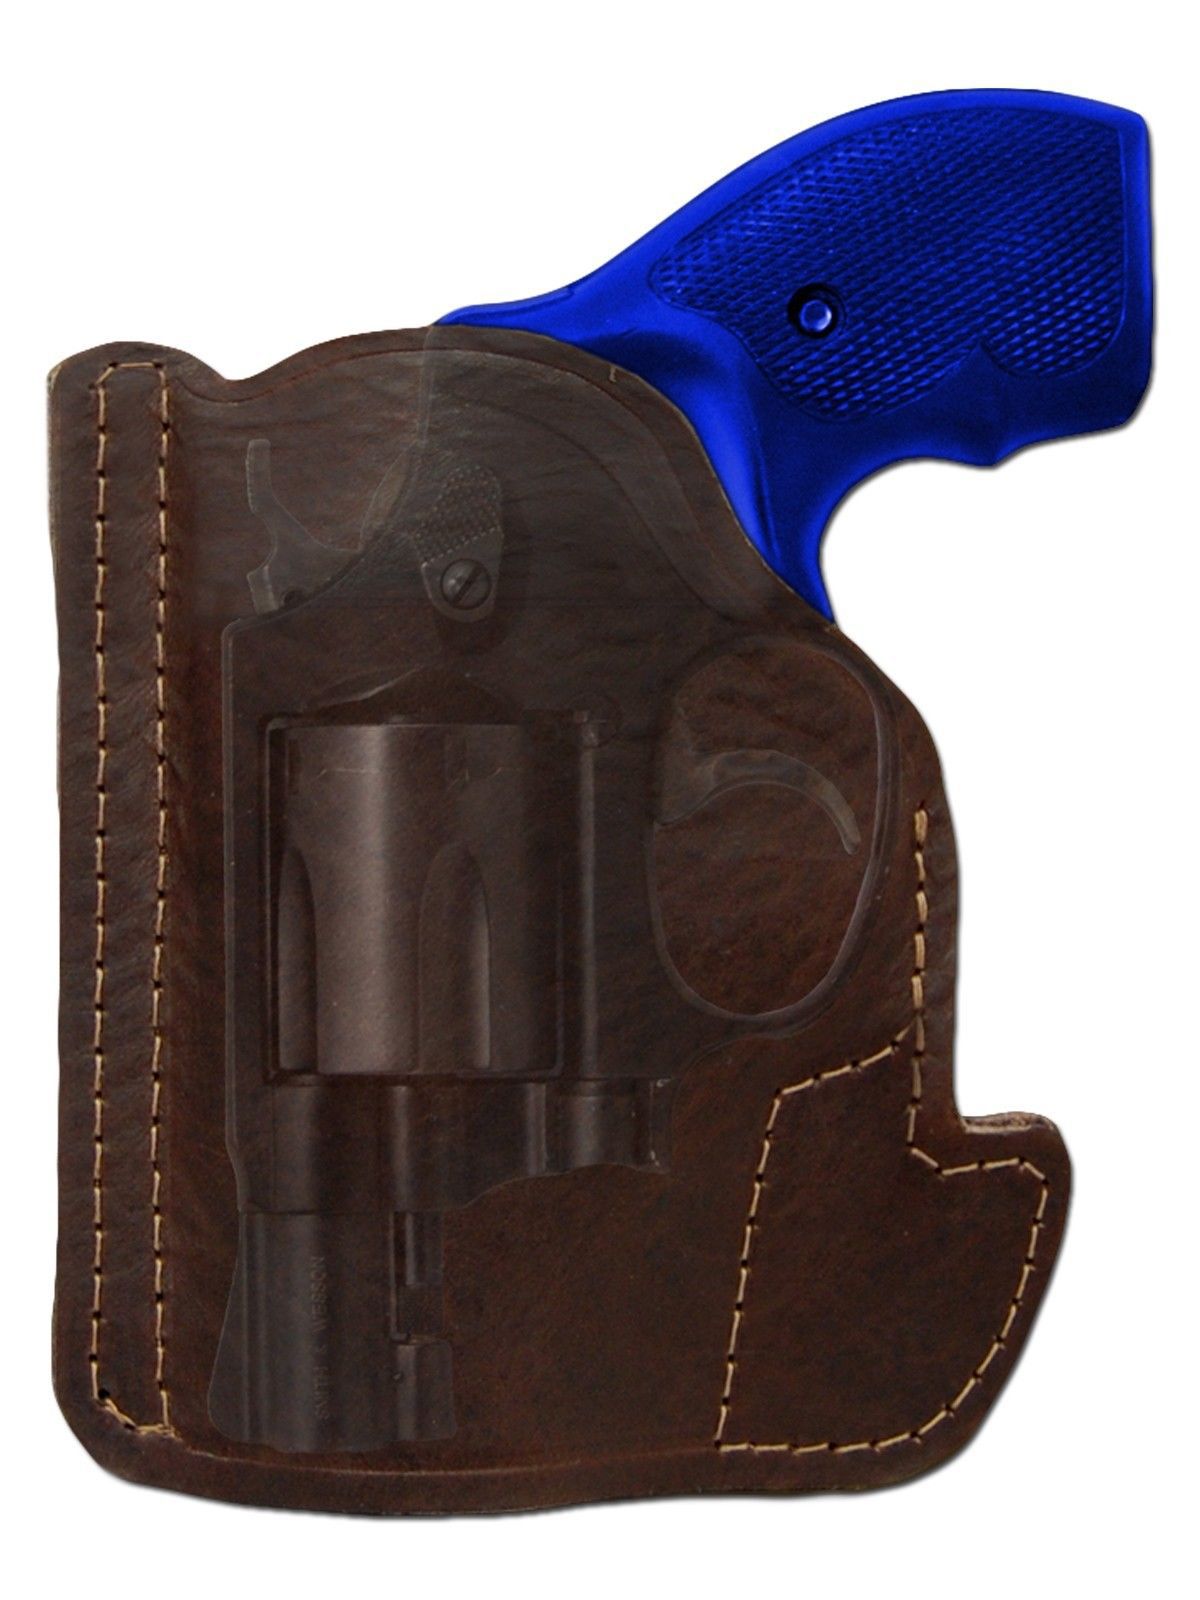 Snub Nose 38 357 Made in the USA by Barsony Holsters and Belts FITS: CHARTE...